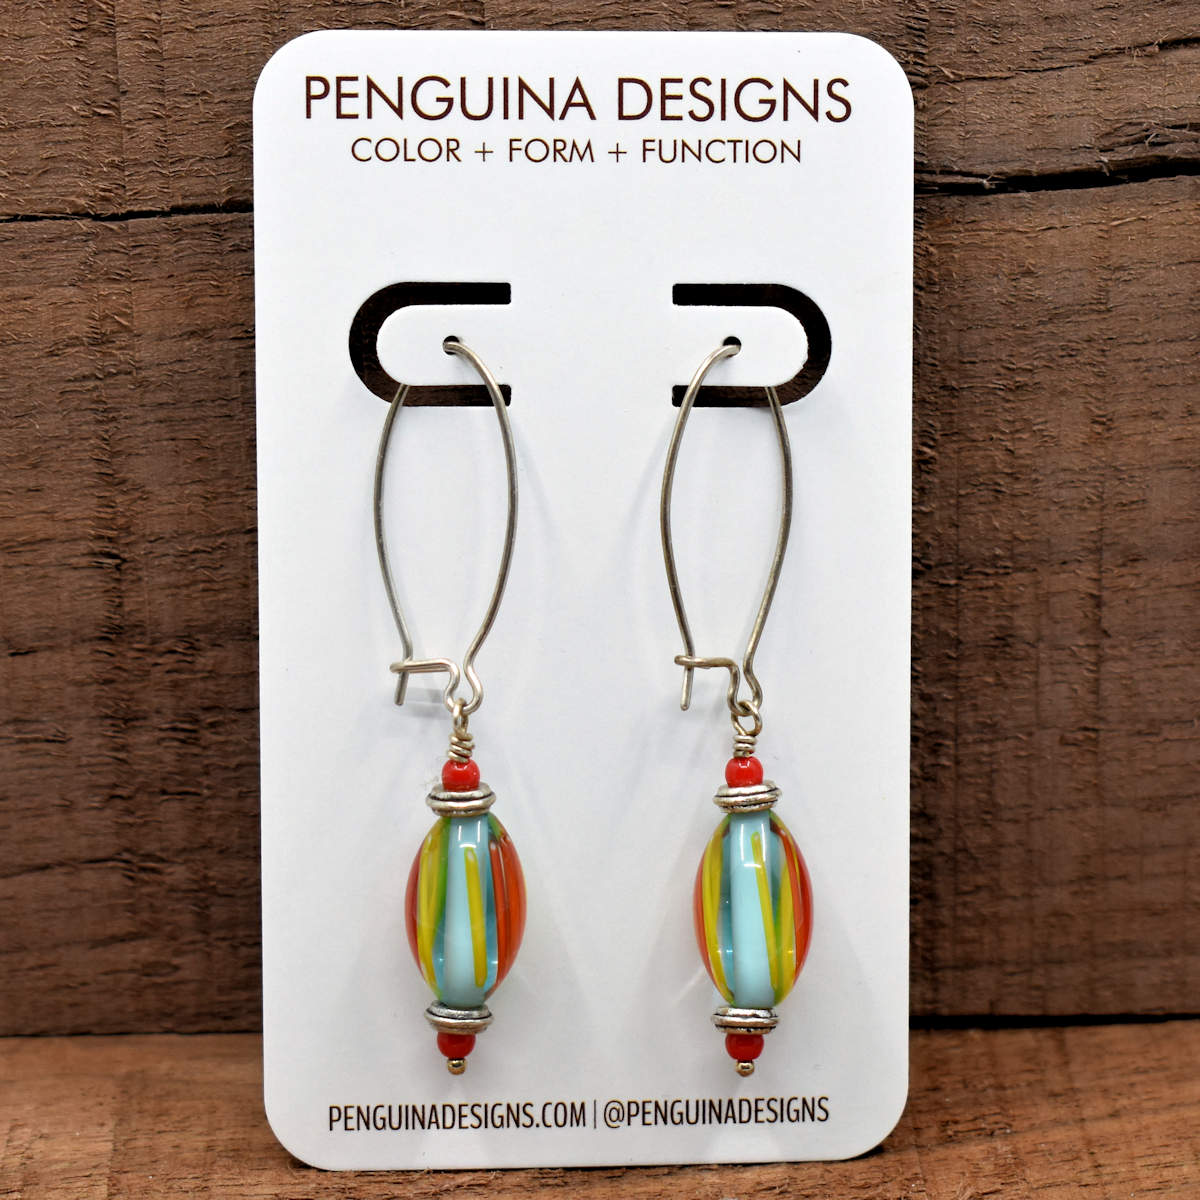 A pair of earrings on a white card rest against a wood background. The earrings have long silver oval wires that latch and the oval drops at the bottom are a light blue with orange and red stripes.